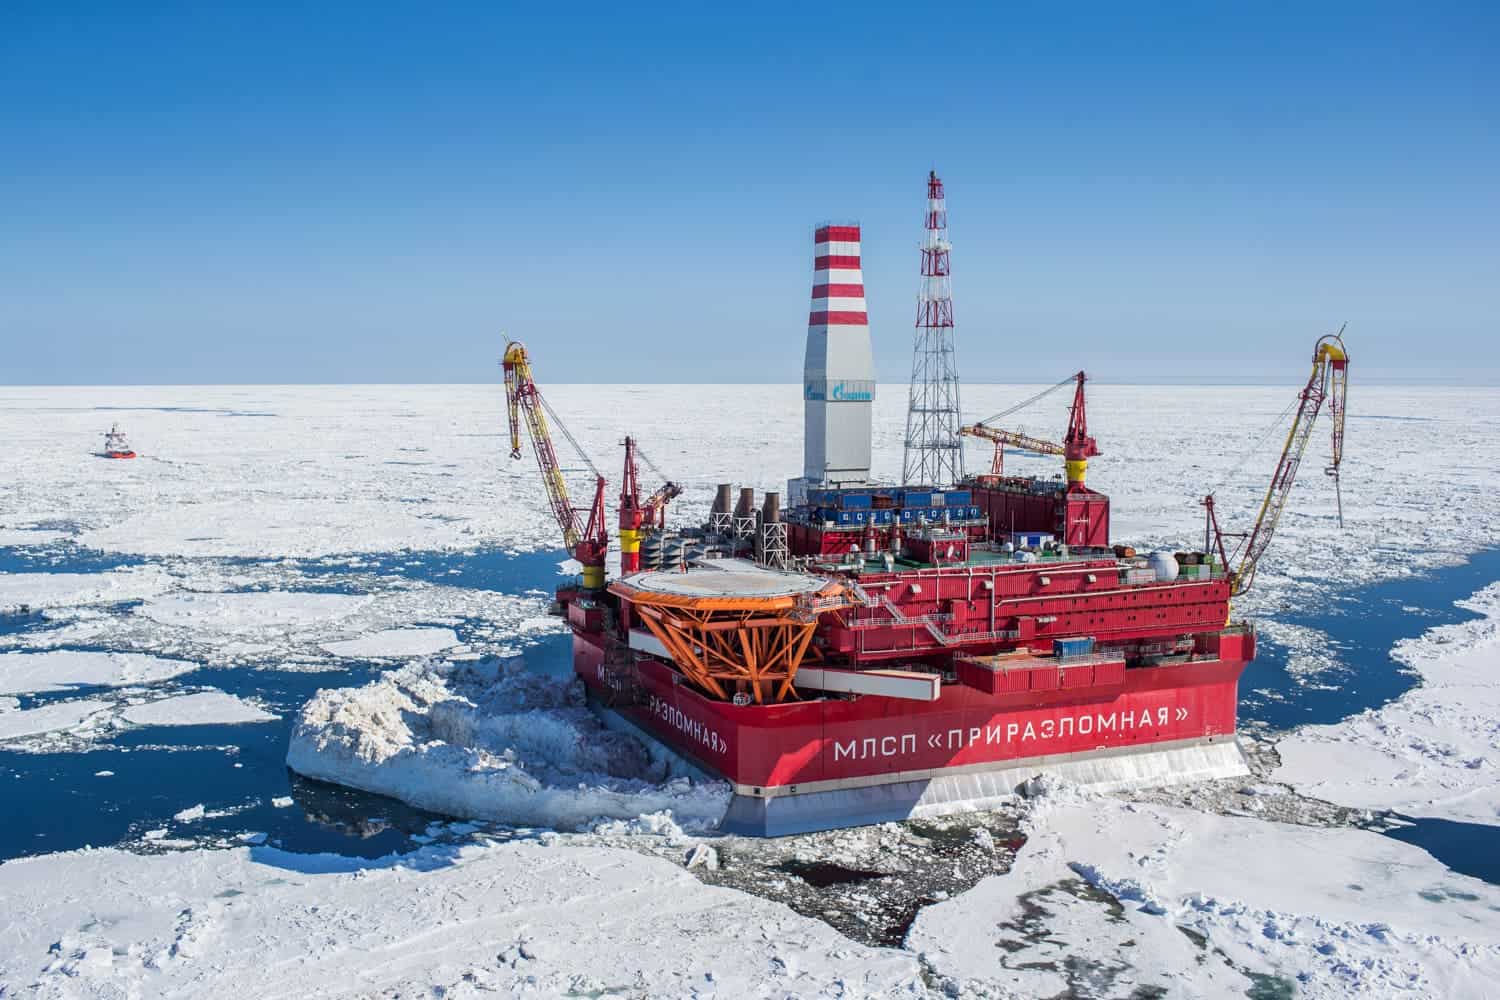 Russian-operated drilling in the Arctic. Image credits: Krichevsky.